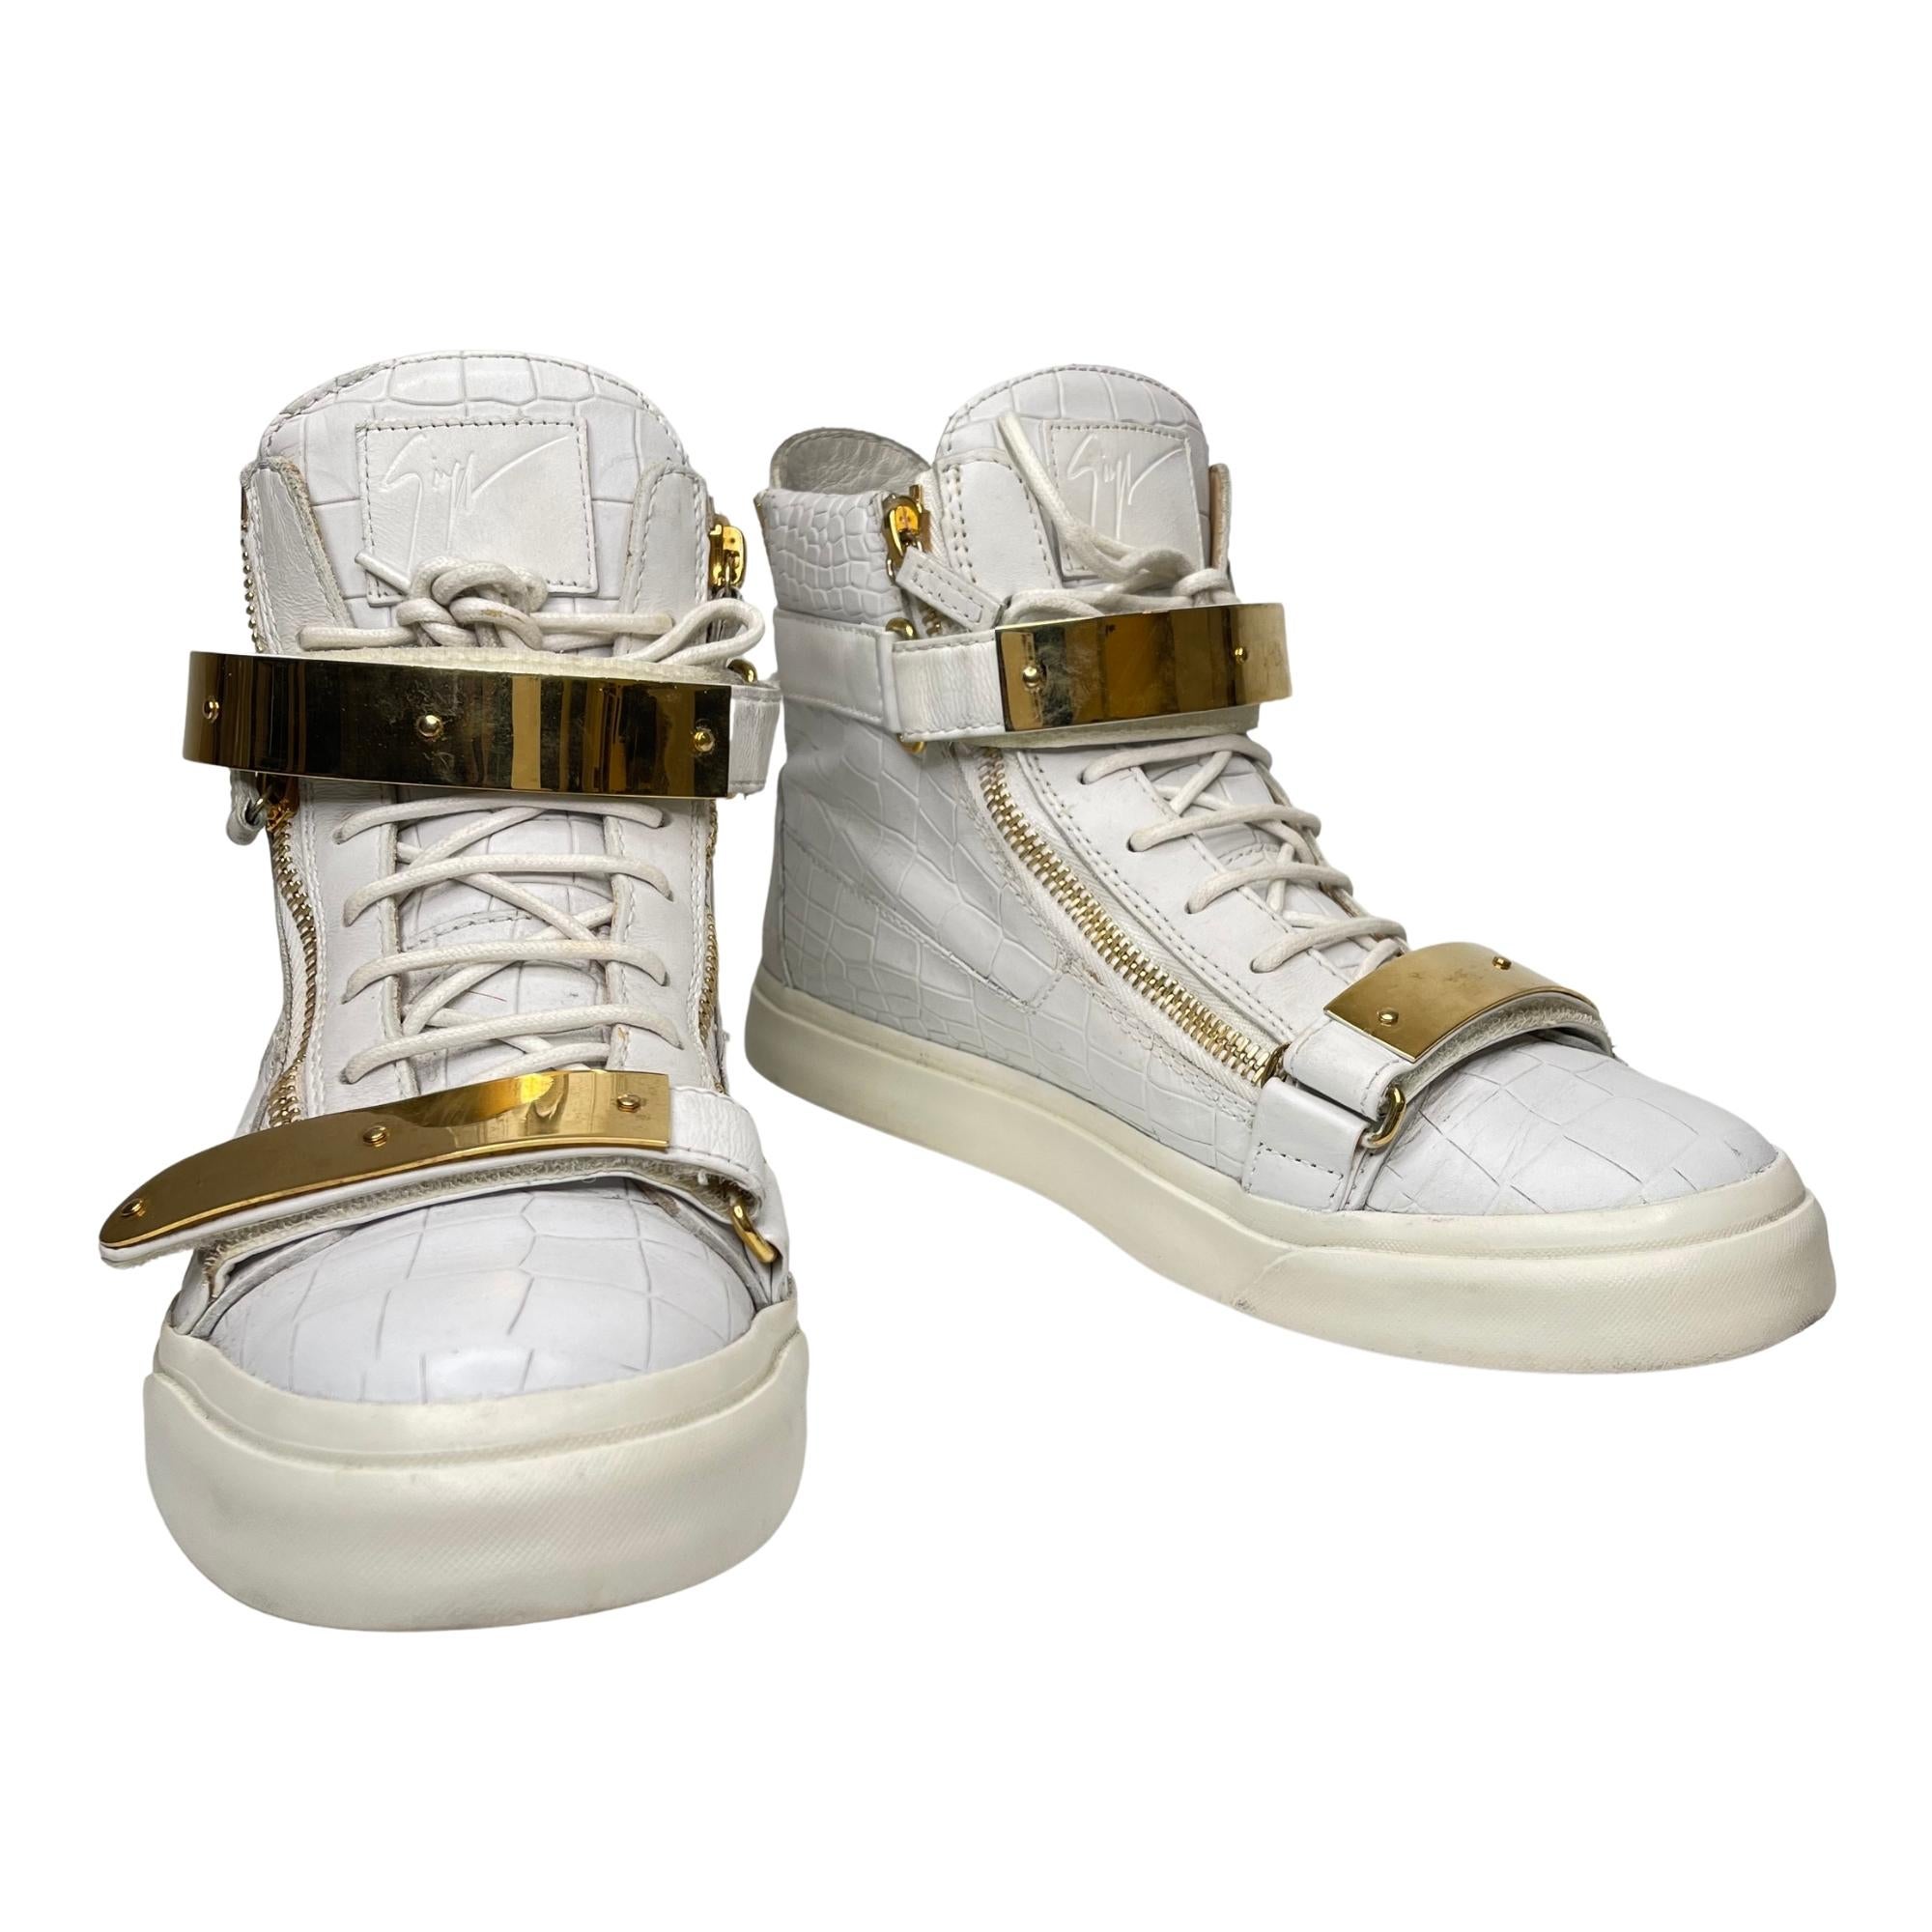 Made from croc-embossed leather, these sneakers come flaunting suave details like the double metal straps, the lace-up, and the zipper details. RDM309.

COLOR: White
MATERIAL: Croc embossed leather
SIZE: 44 EU / 11 US
COMES WITH: Dust bag and